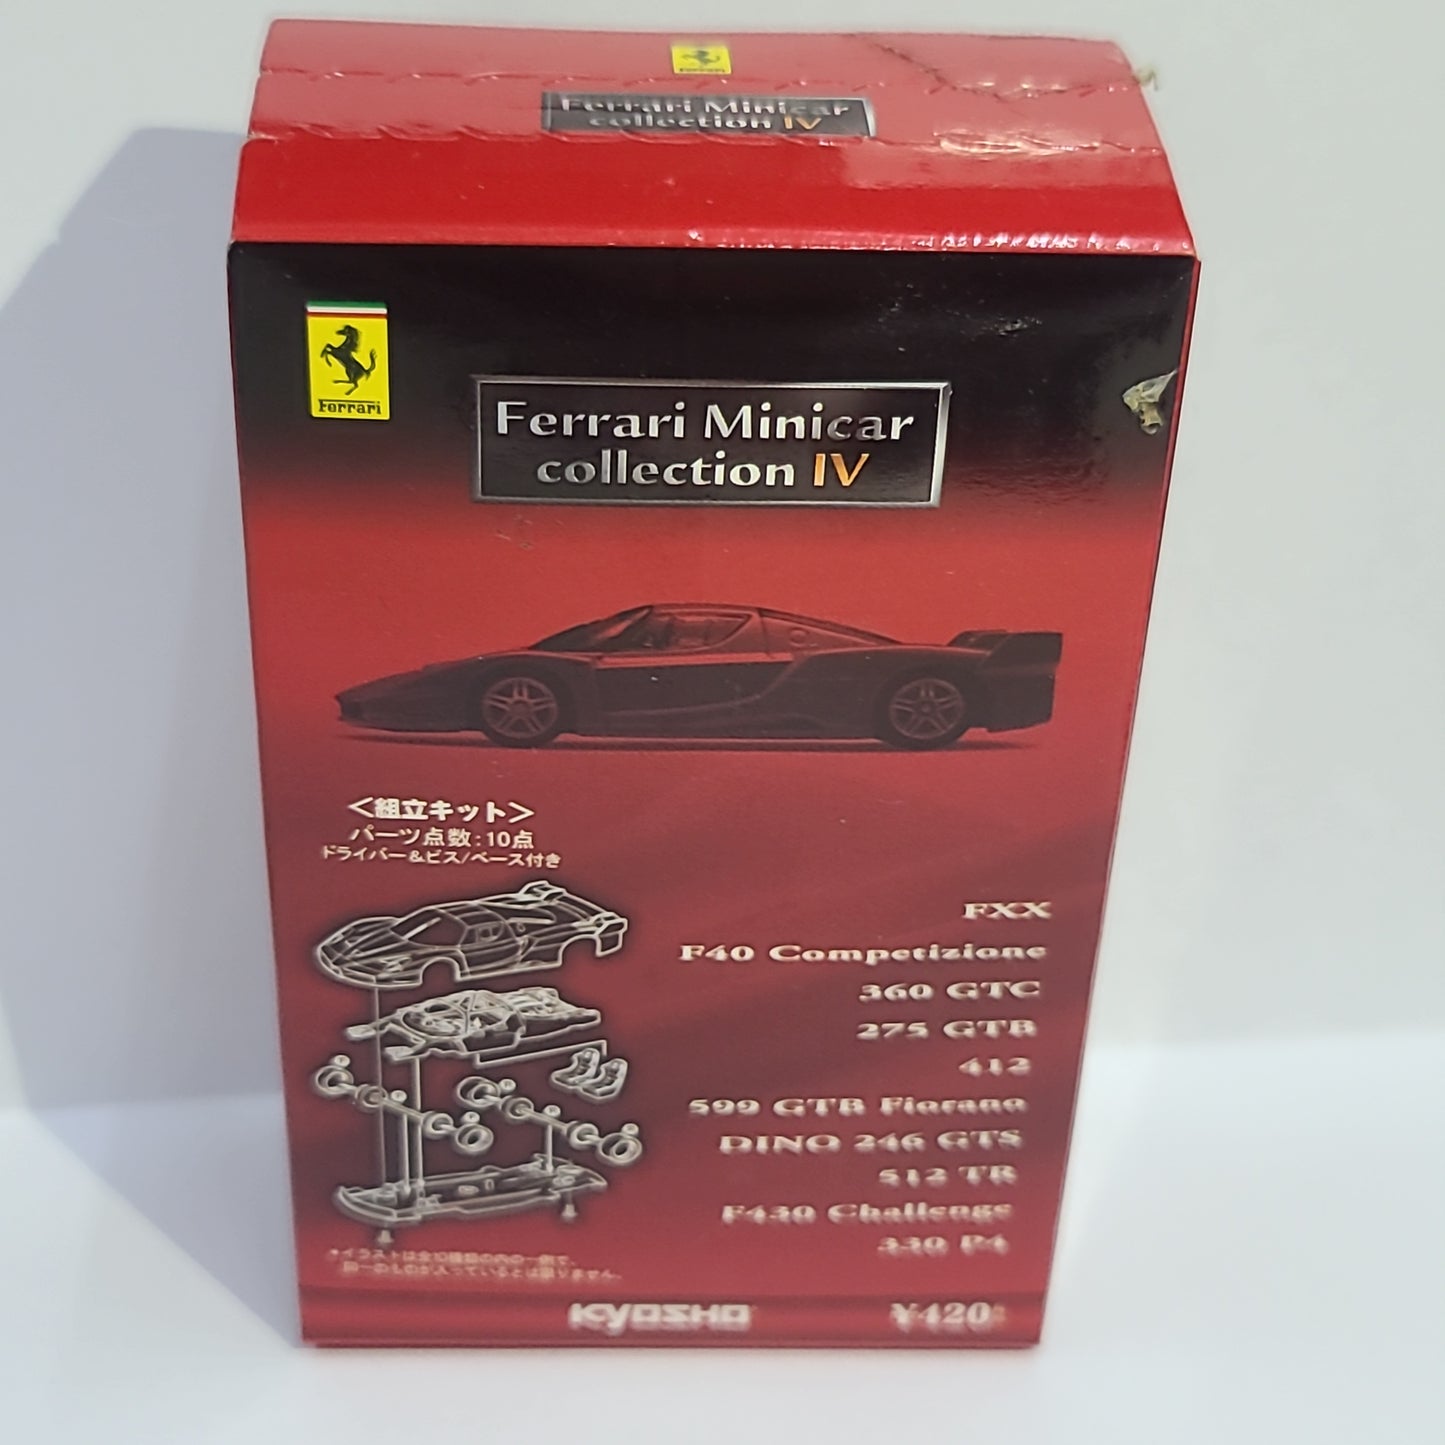 Kyosho 1:64 Scale Ferrari Minicar Collection IV 360 GTC Red